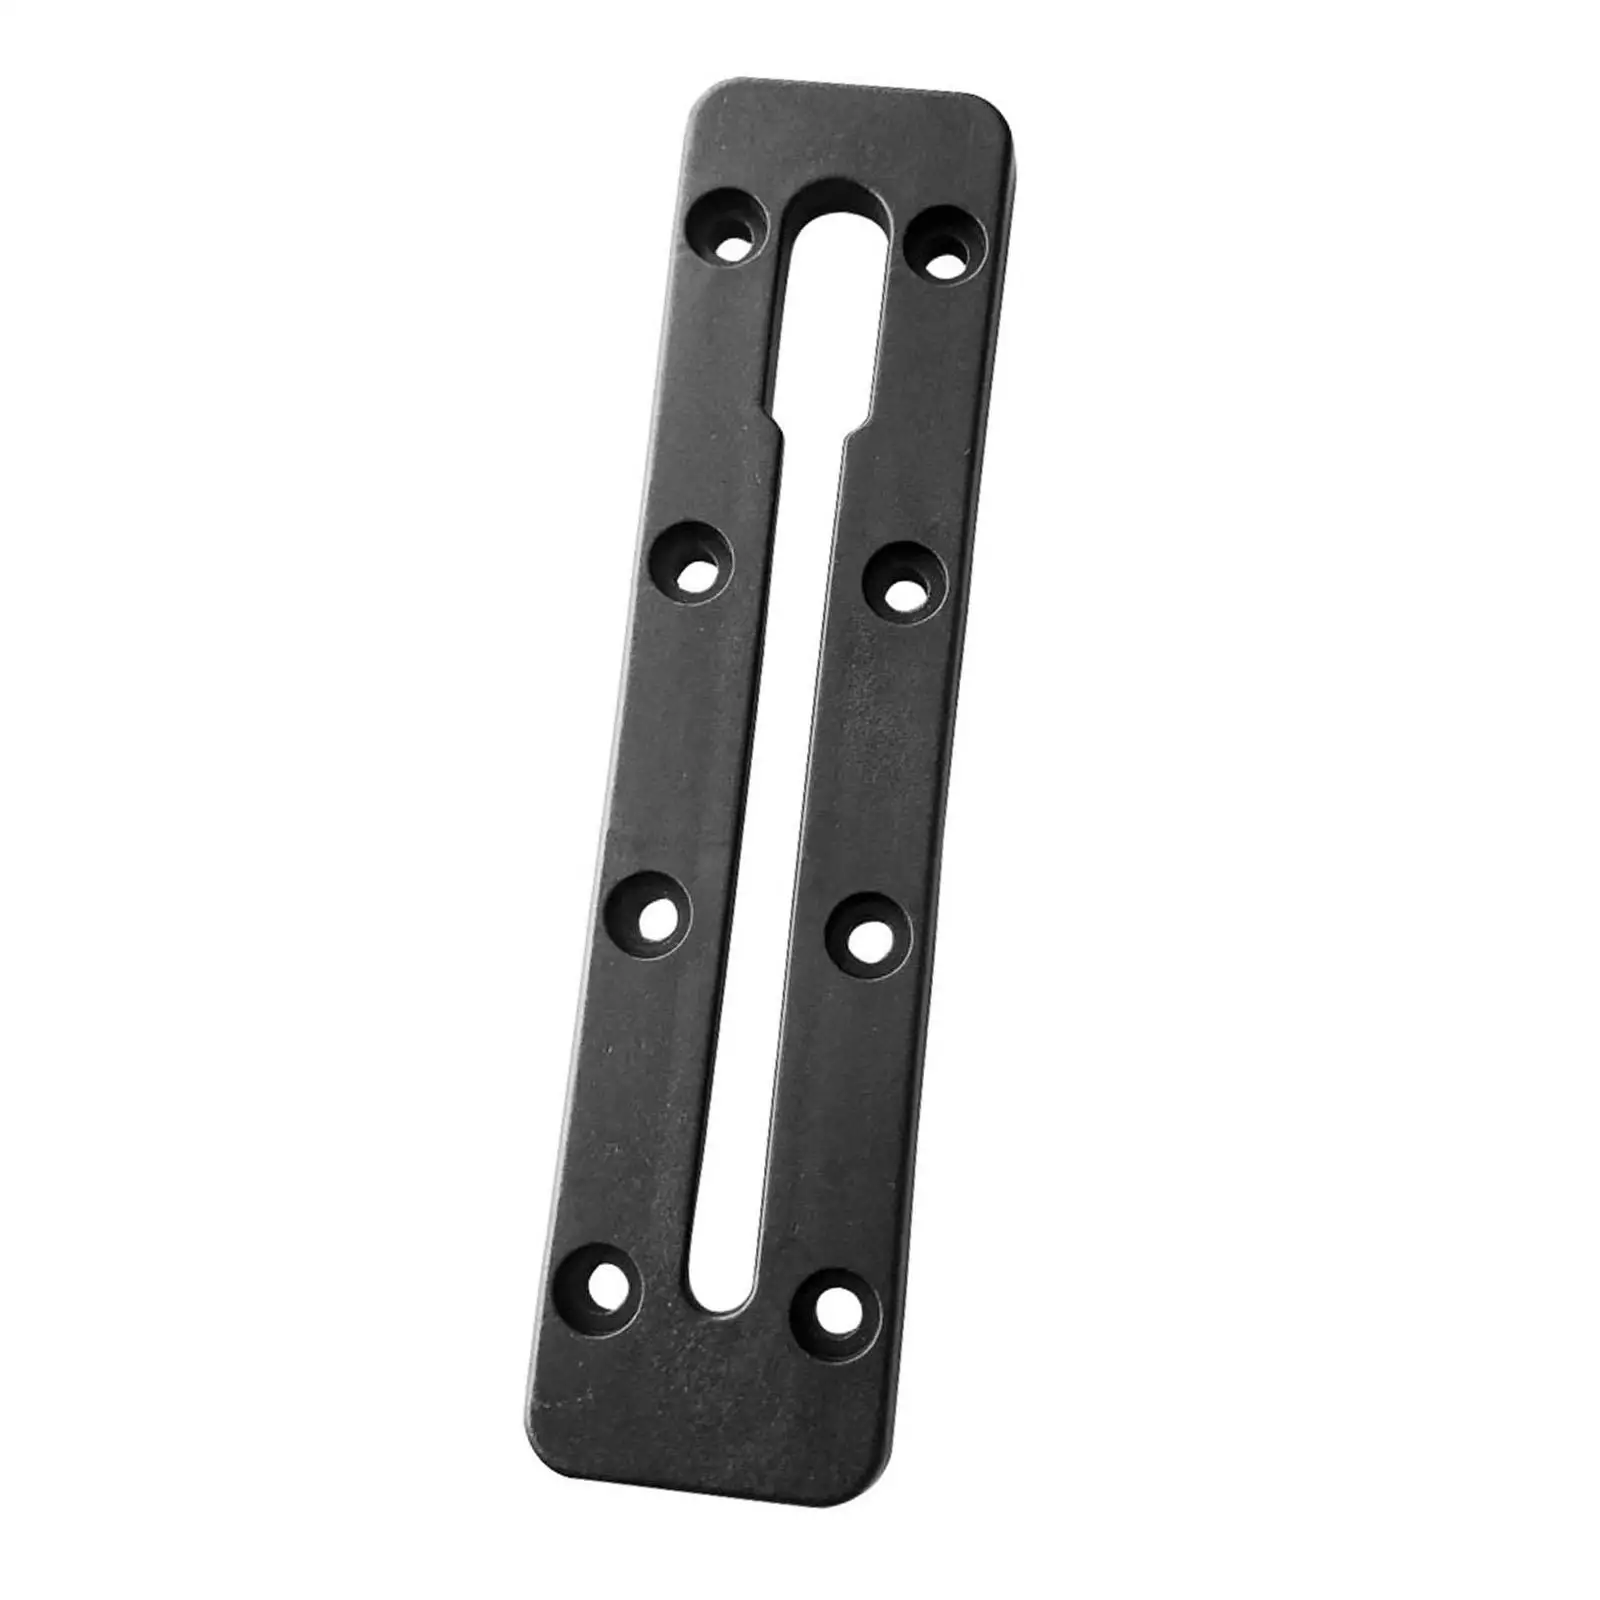 Kayak Slide Track Replaces Accessories Easy to Install Convenient for Kayak